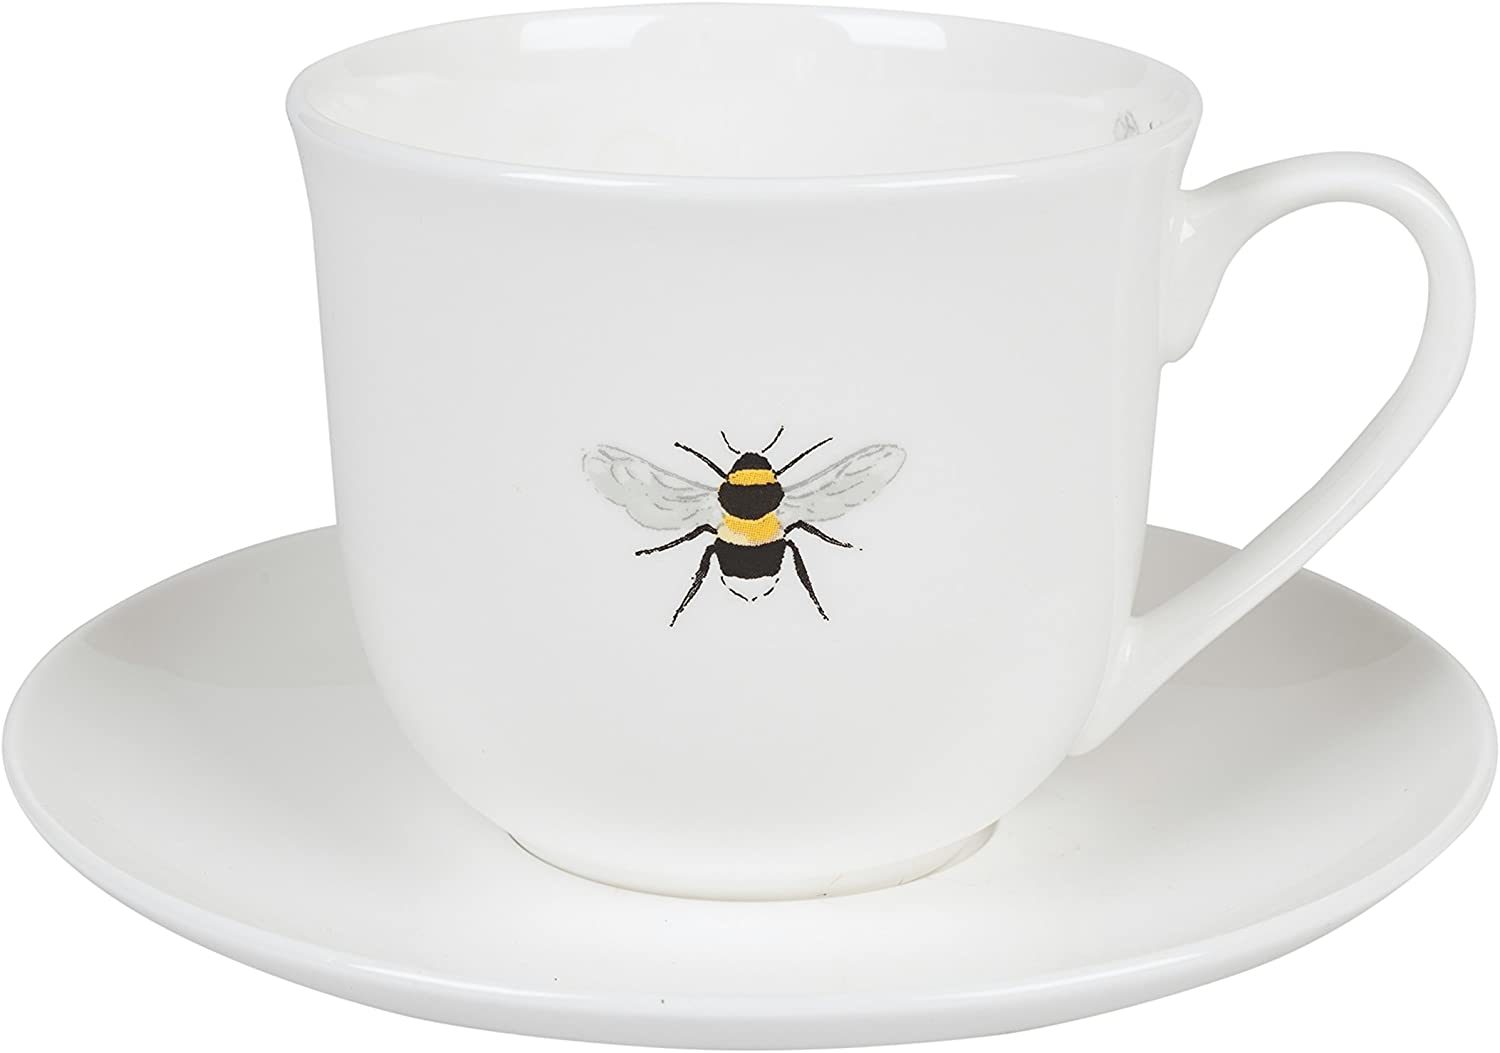 Sophie Allport - Bees, bees - tea cup with saucer - coffee cup, cup - porcelain - large - height: 9.5 cm - volume: 450 ml